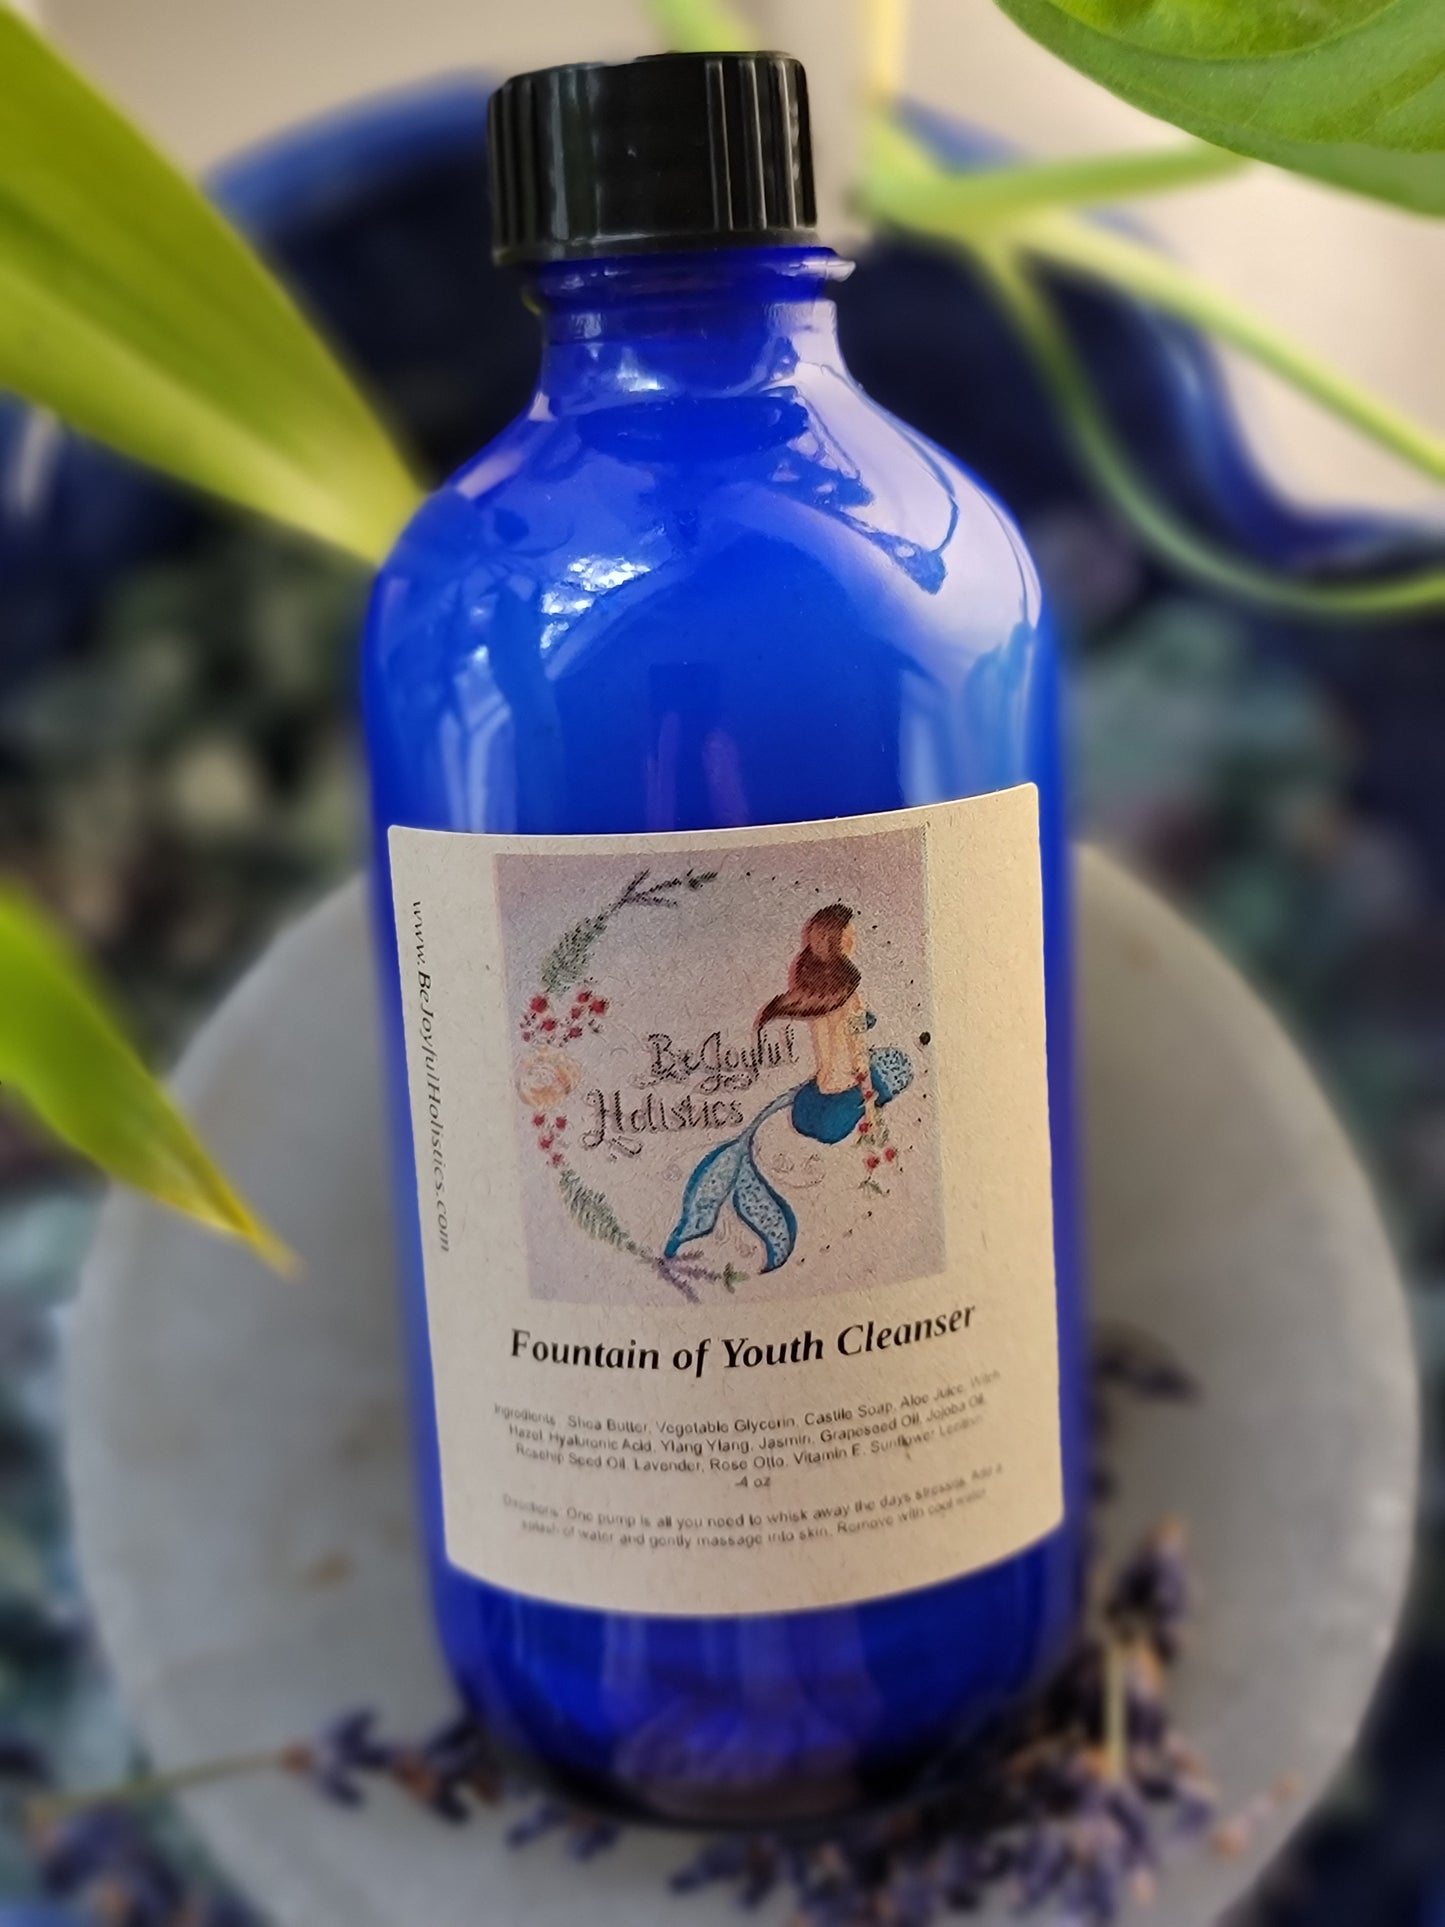 Fountain of Youth Cleanser